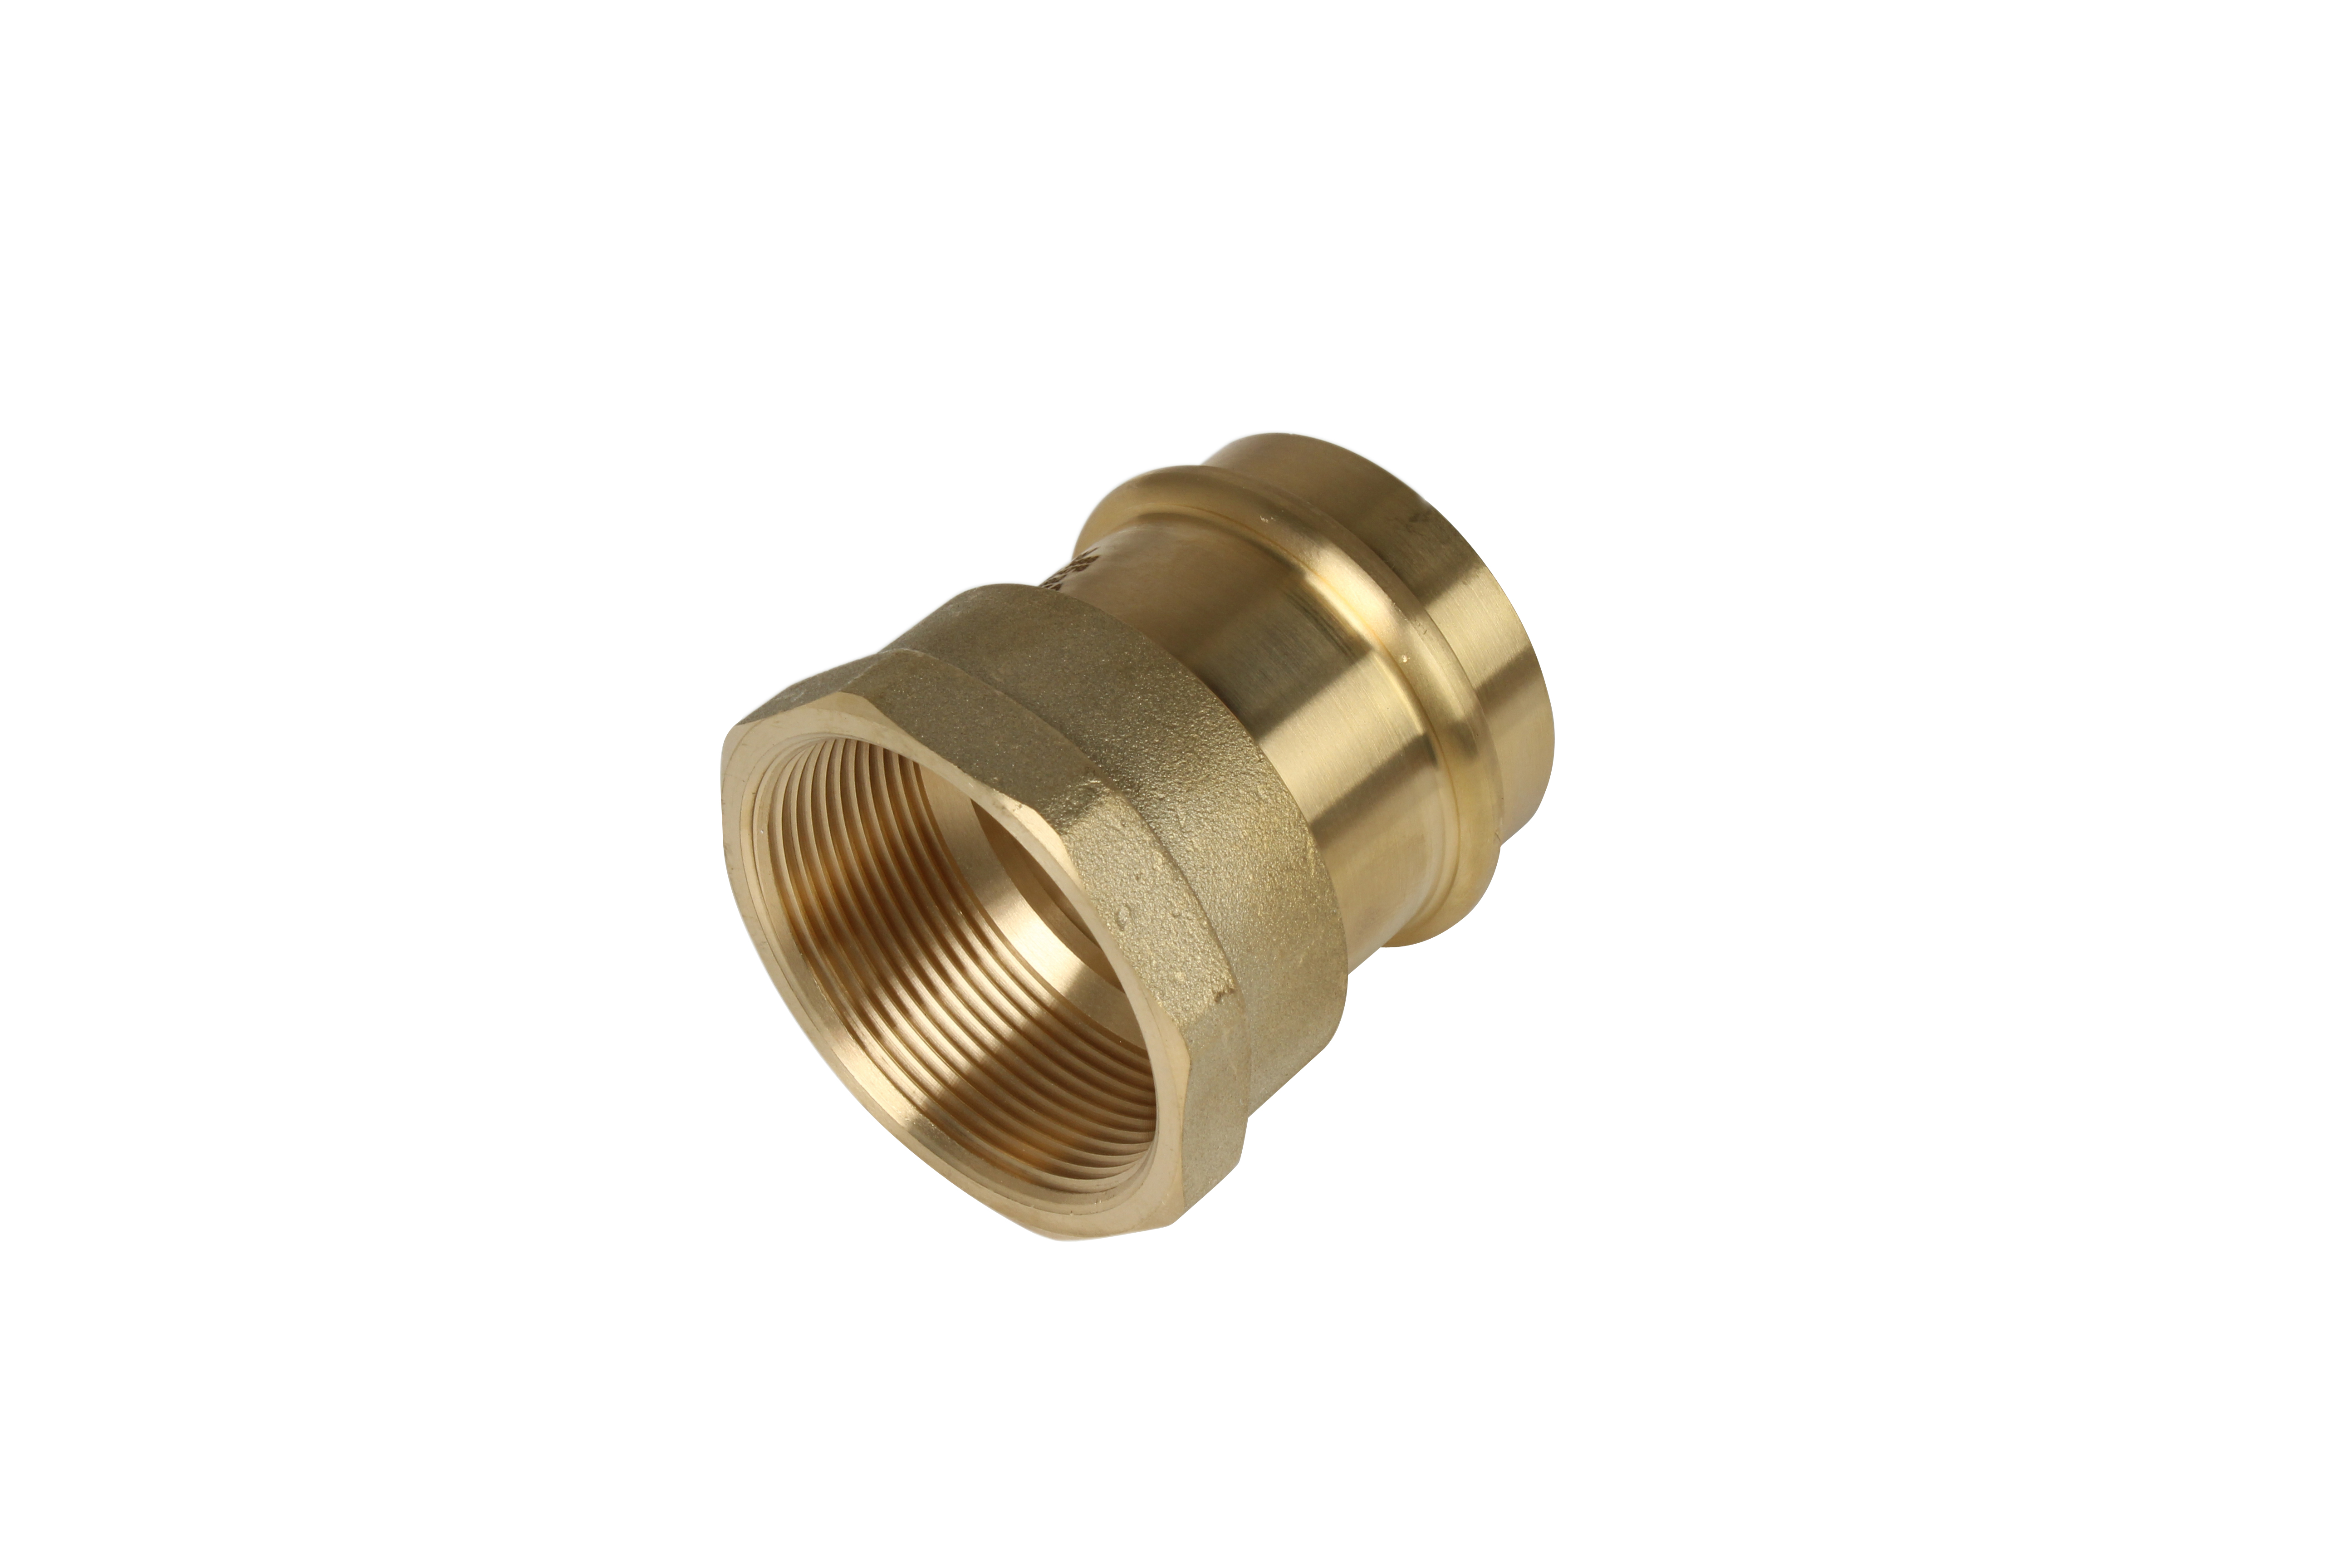 CONNECTOR V-PRESS WATER 40MM X 1-1/2FI